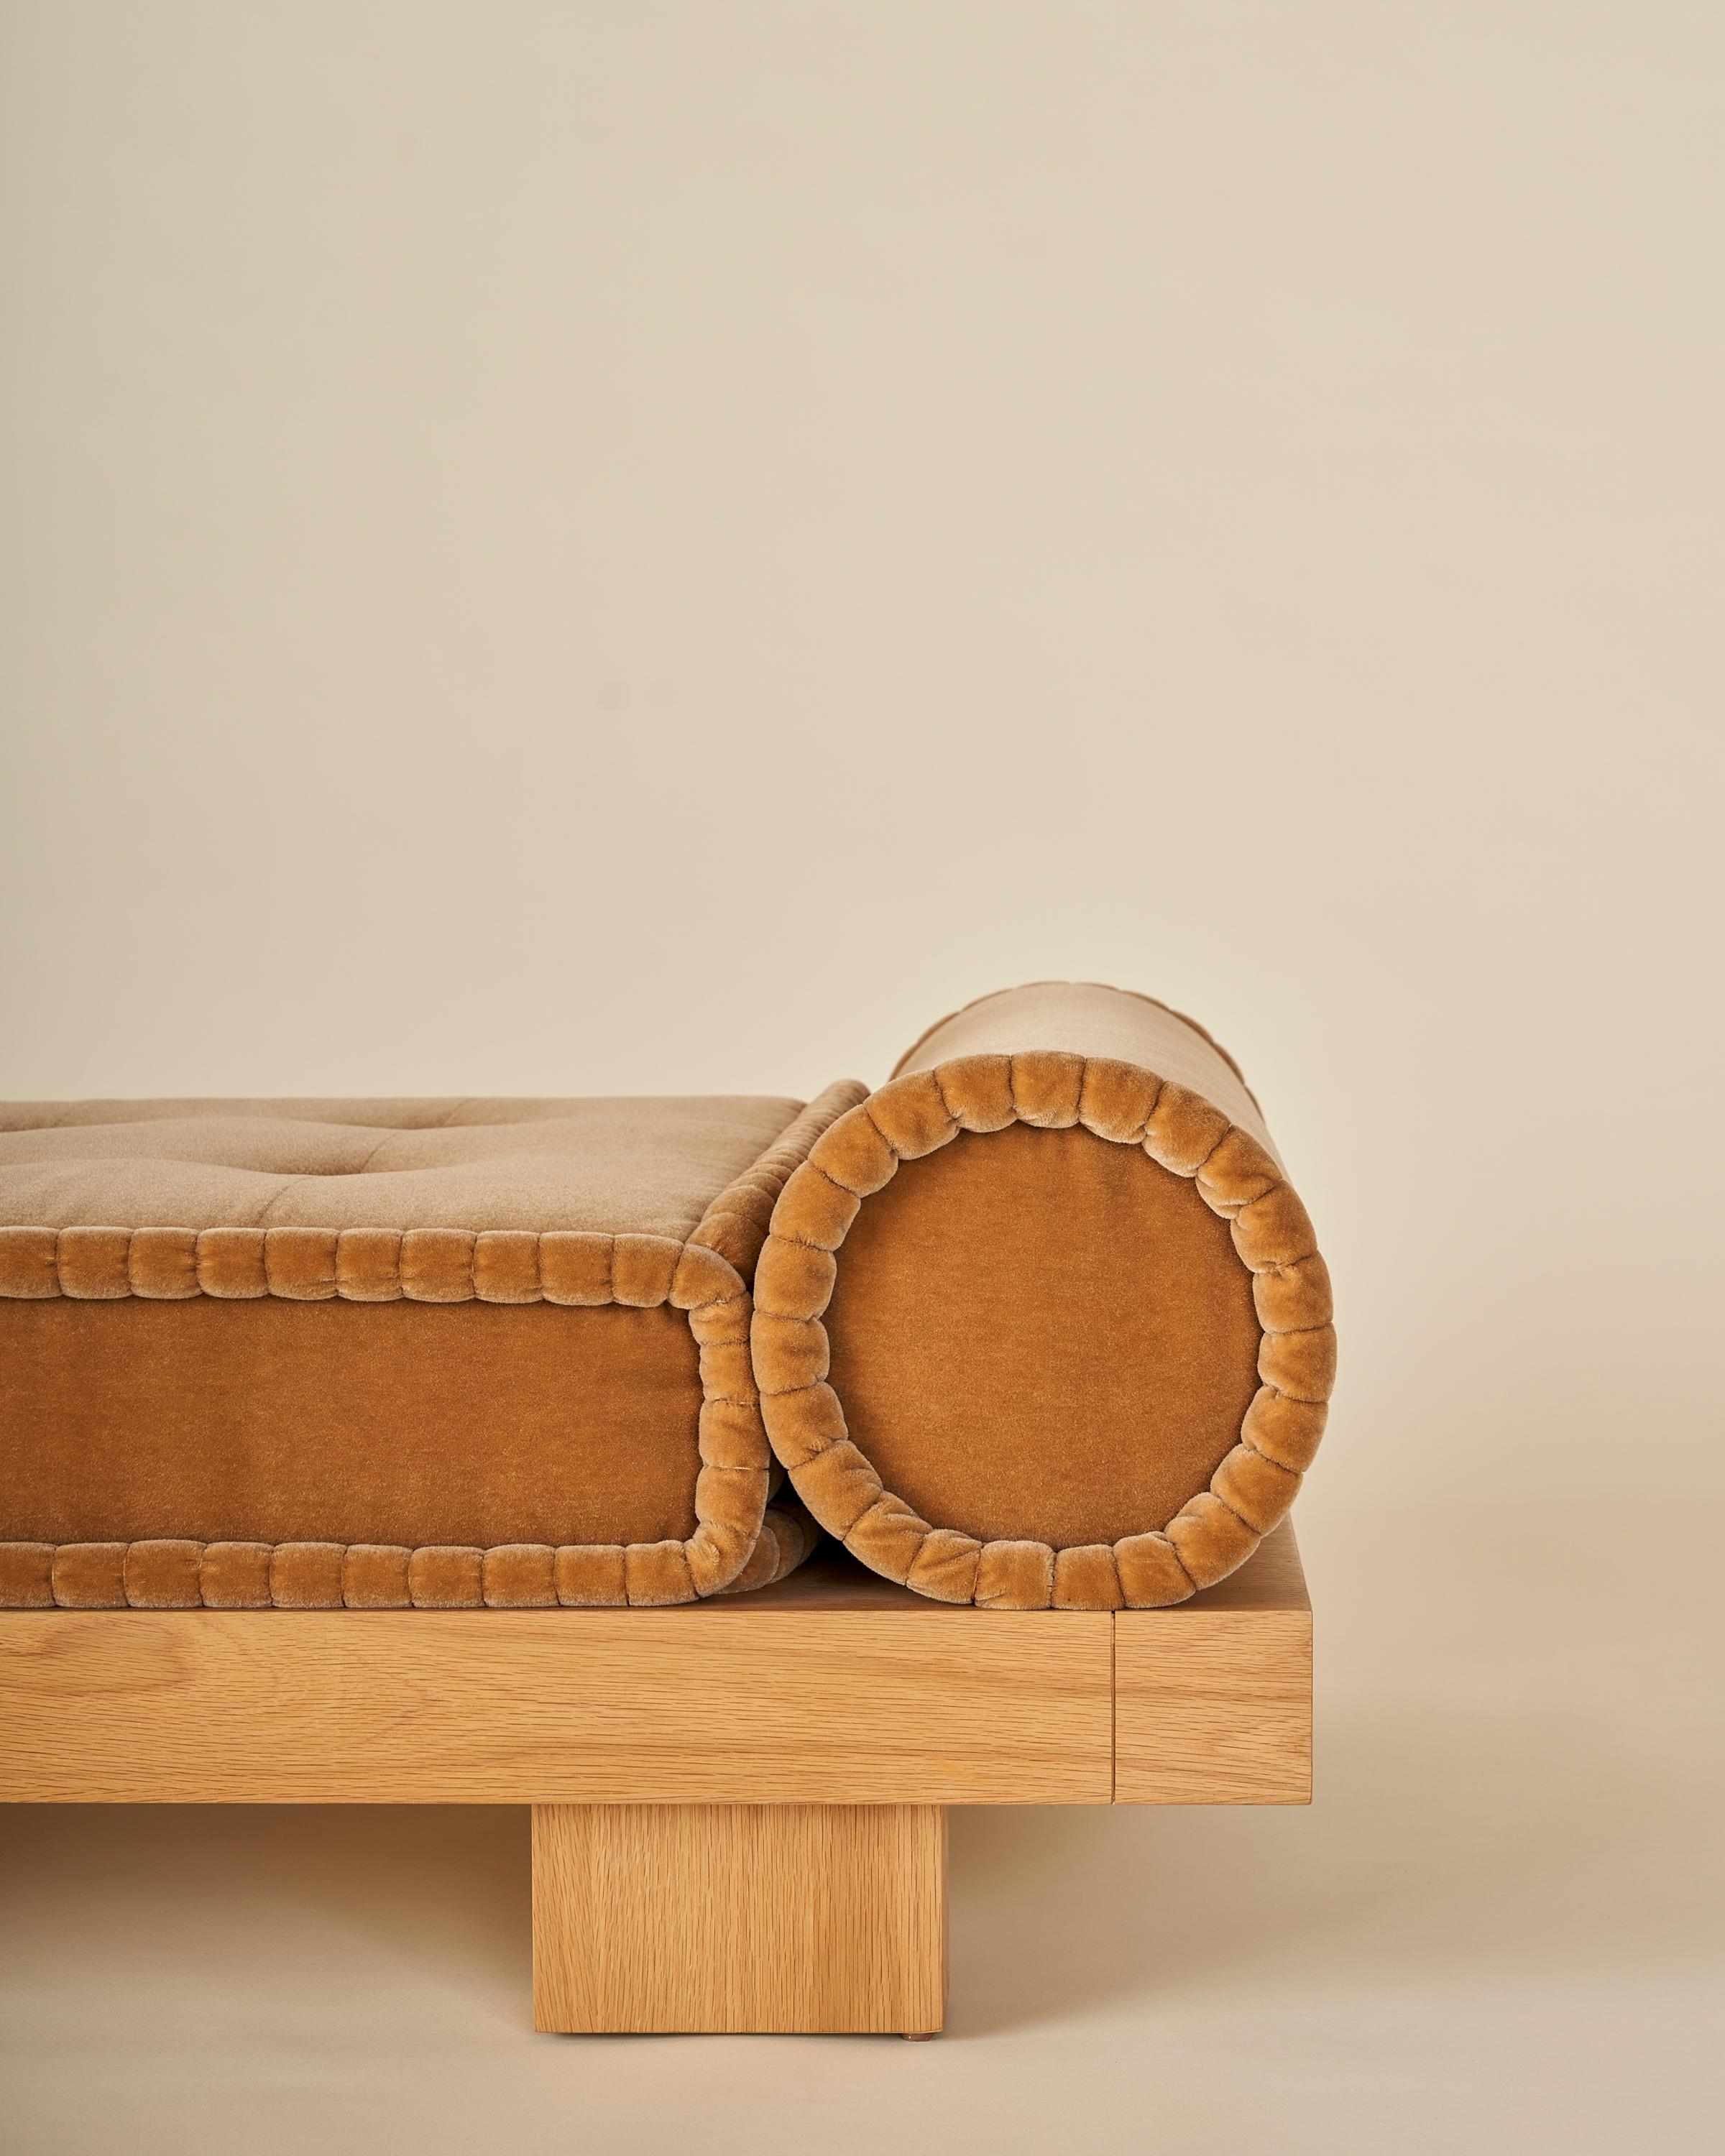 This solid oak daybed is sure to compliment any space with its minimalist and graceful solid oak frame. The piece features a handcrafted French tufted mattress that boasts the traditional rolled edge and tall box shape. The mattress is flanked by